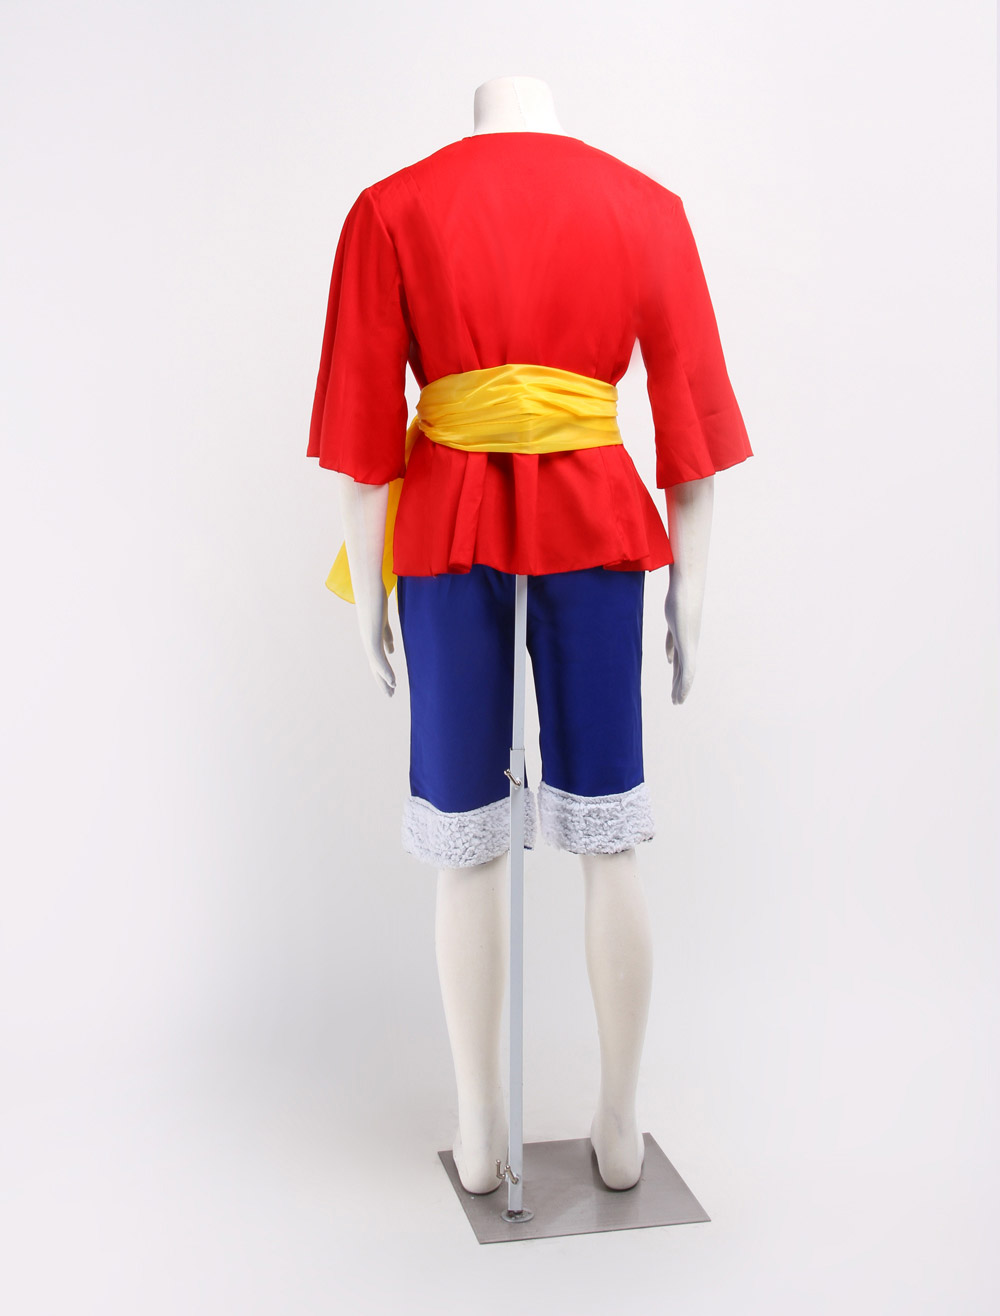 One piece Monkey·D·Luffy Two Years Later Cosplay Costume